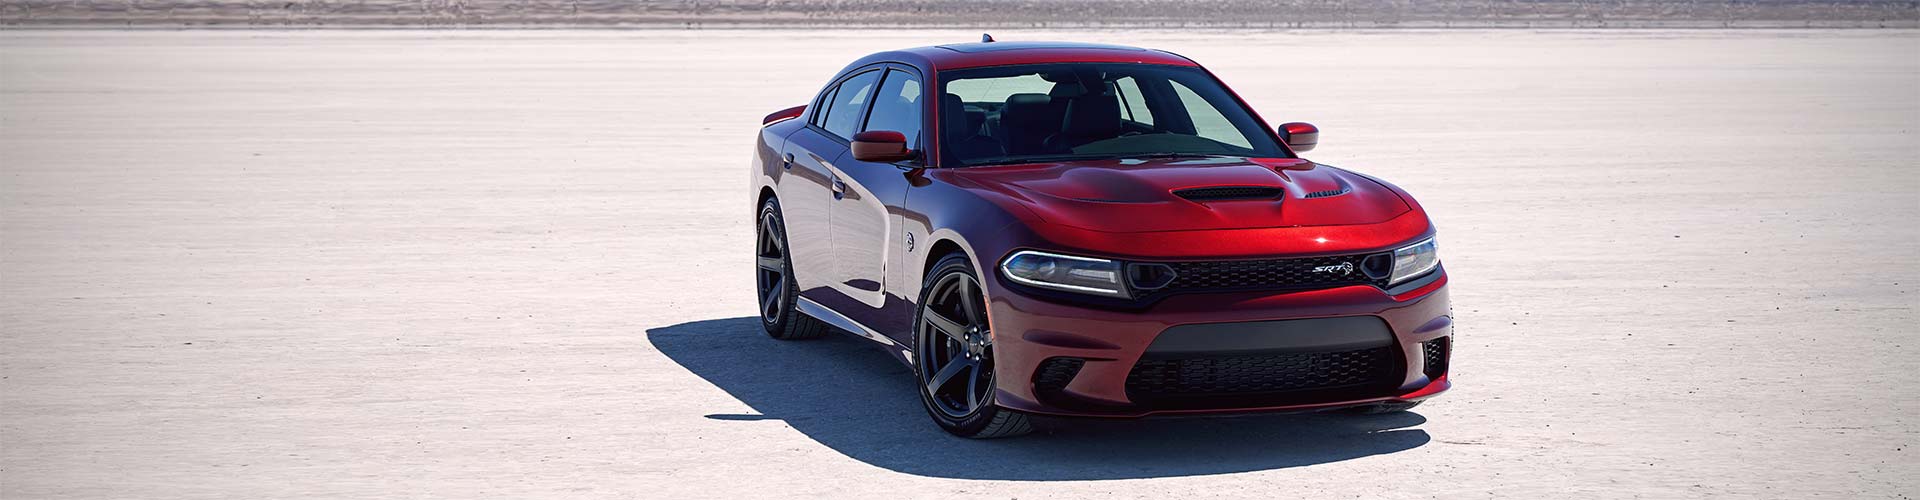 2019 Dodge Charger Overview Aec Europe